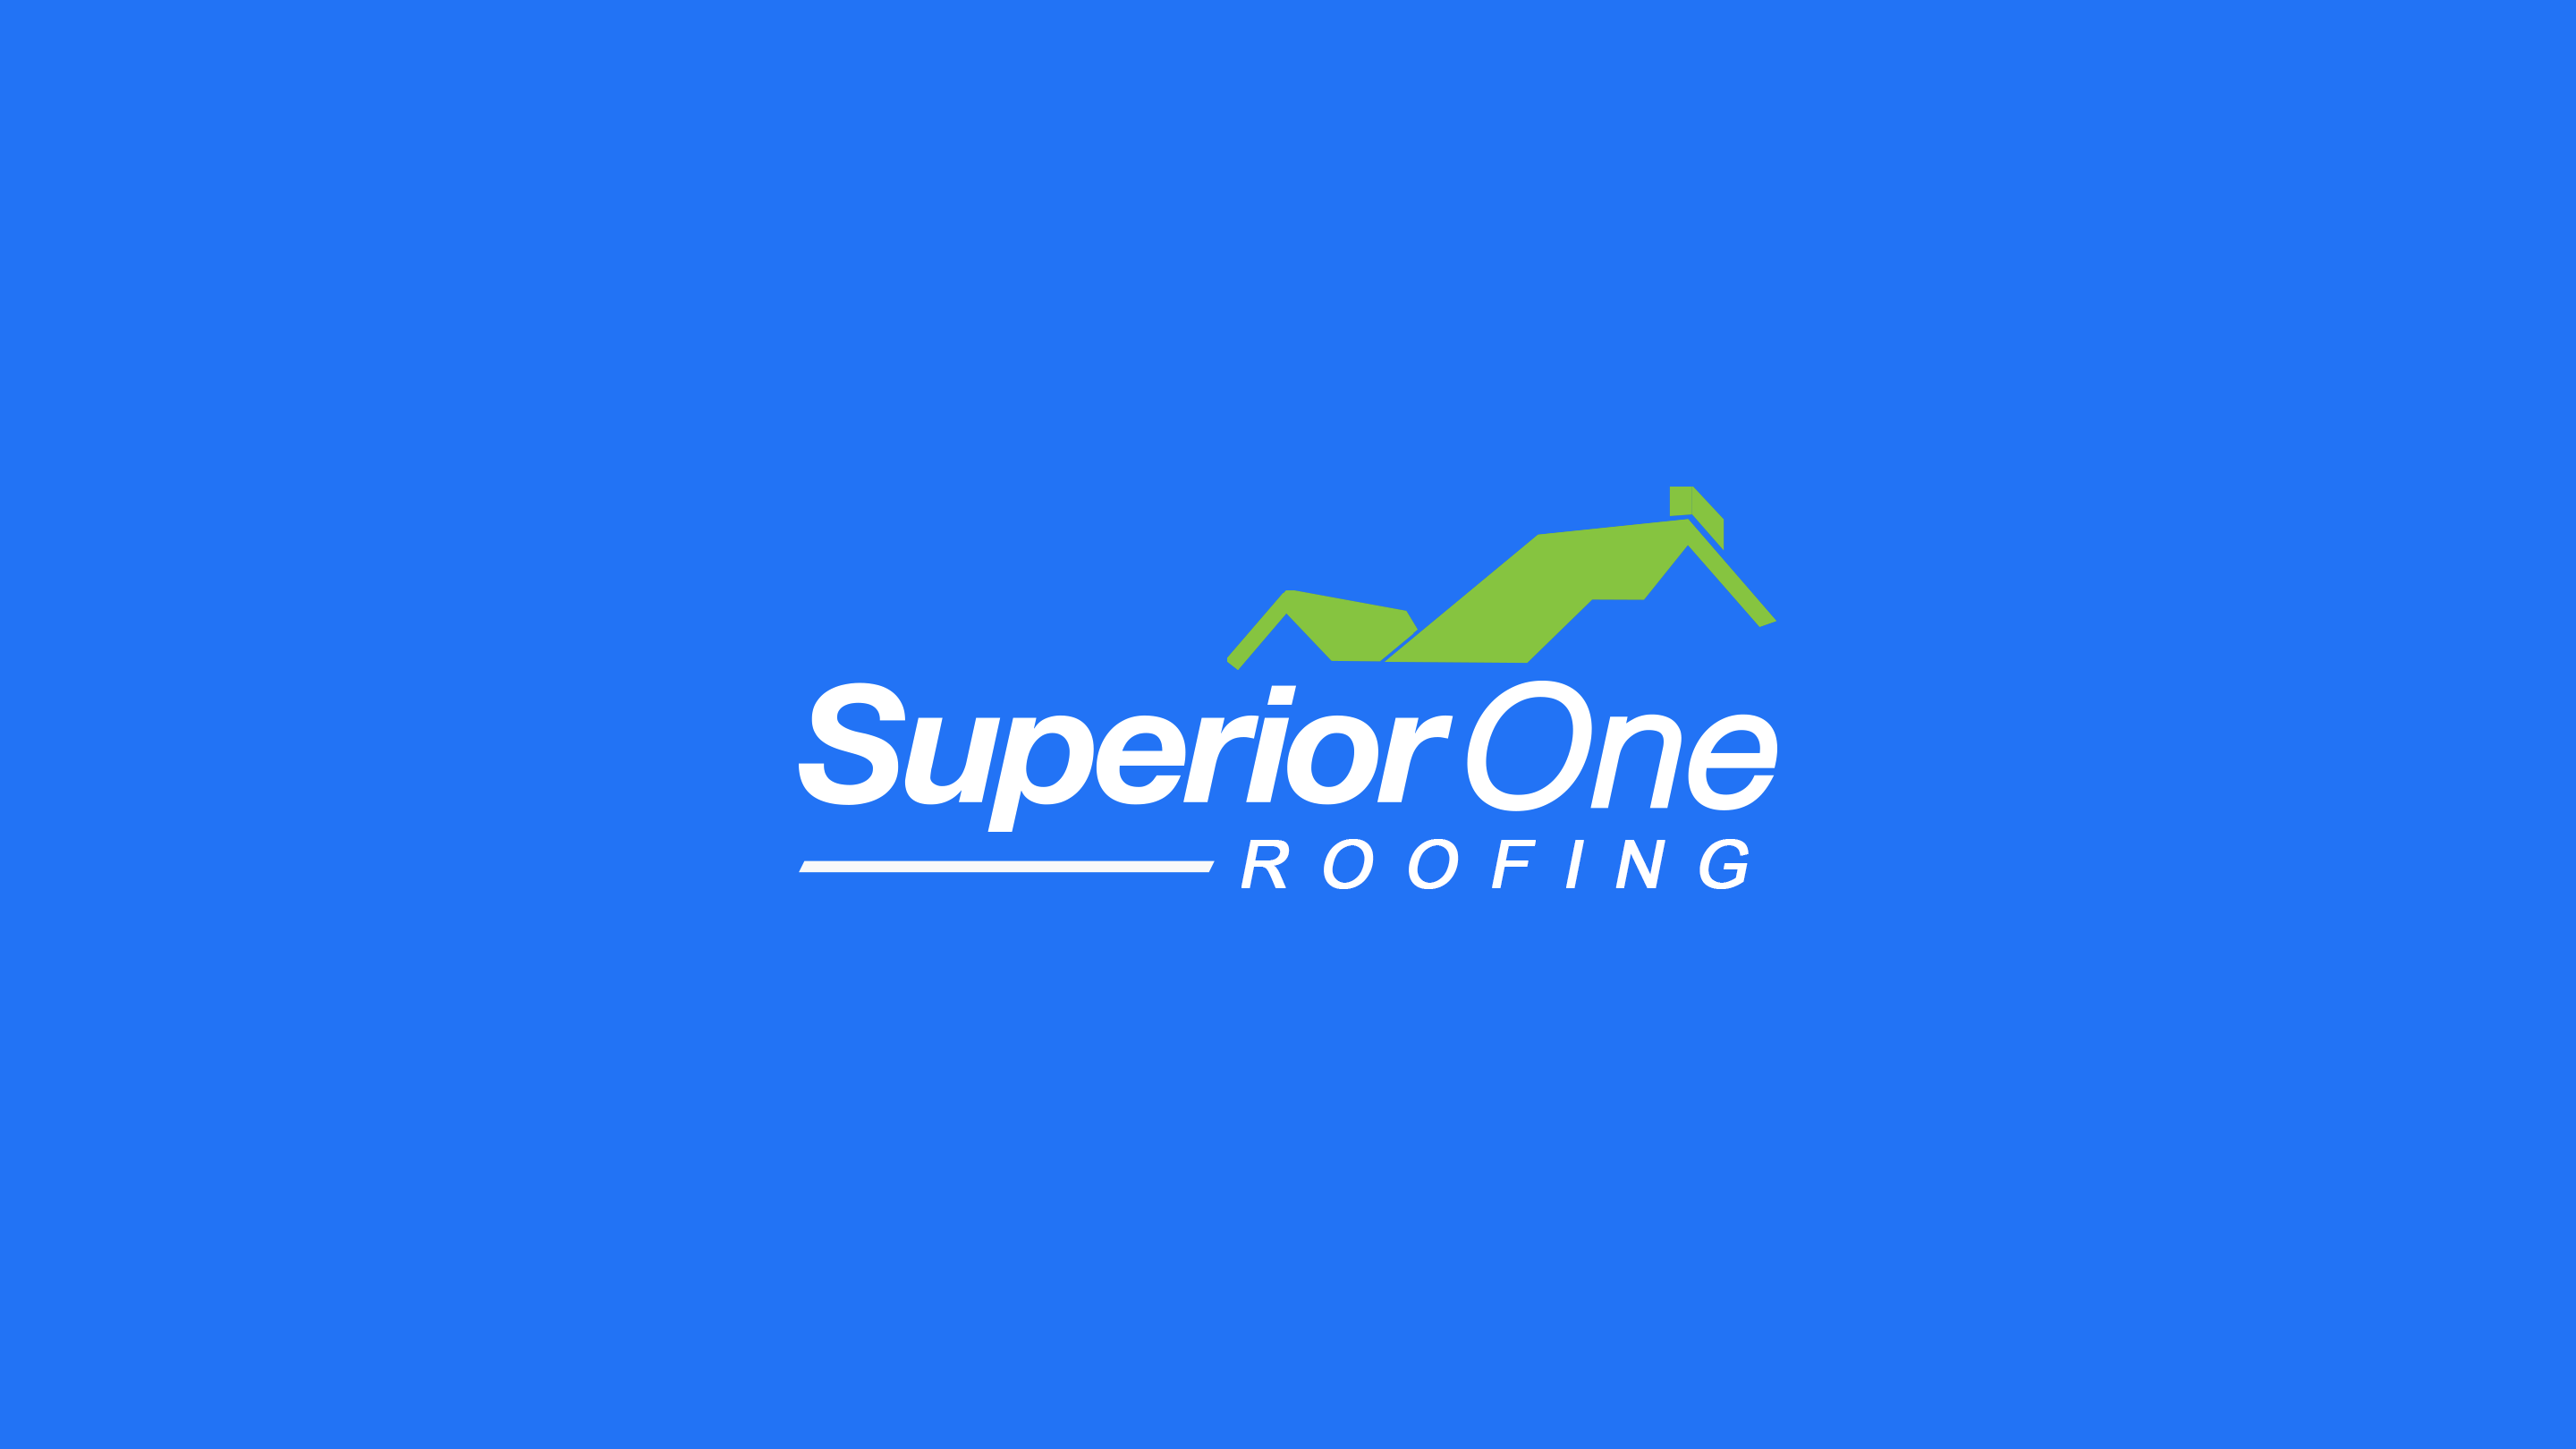 Superior One Roofing - sor logo bluebg - New Minds Group